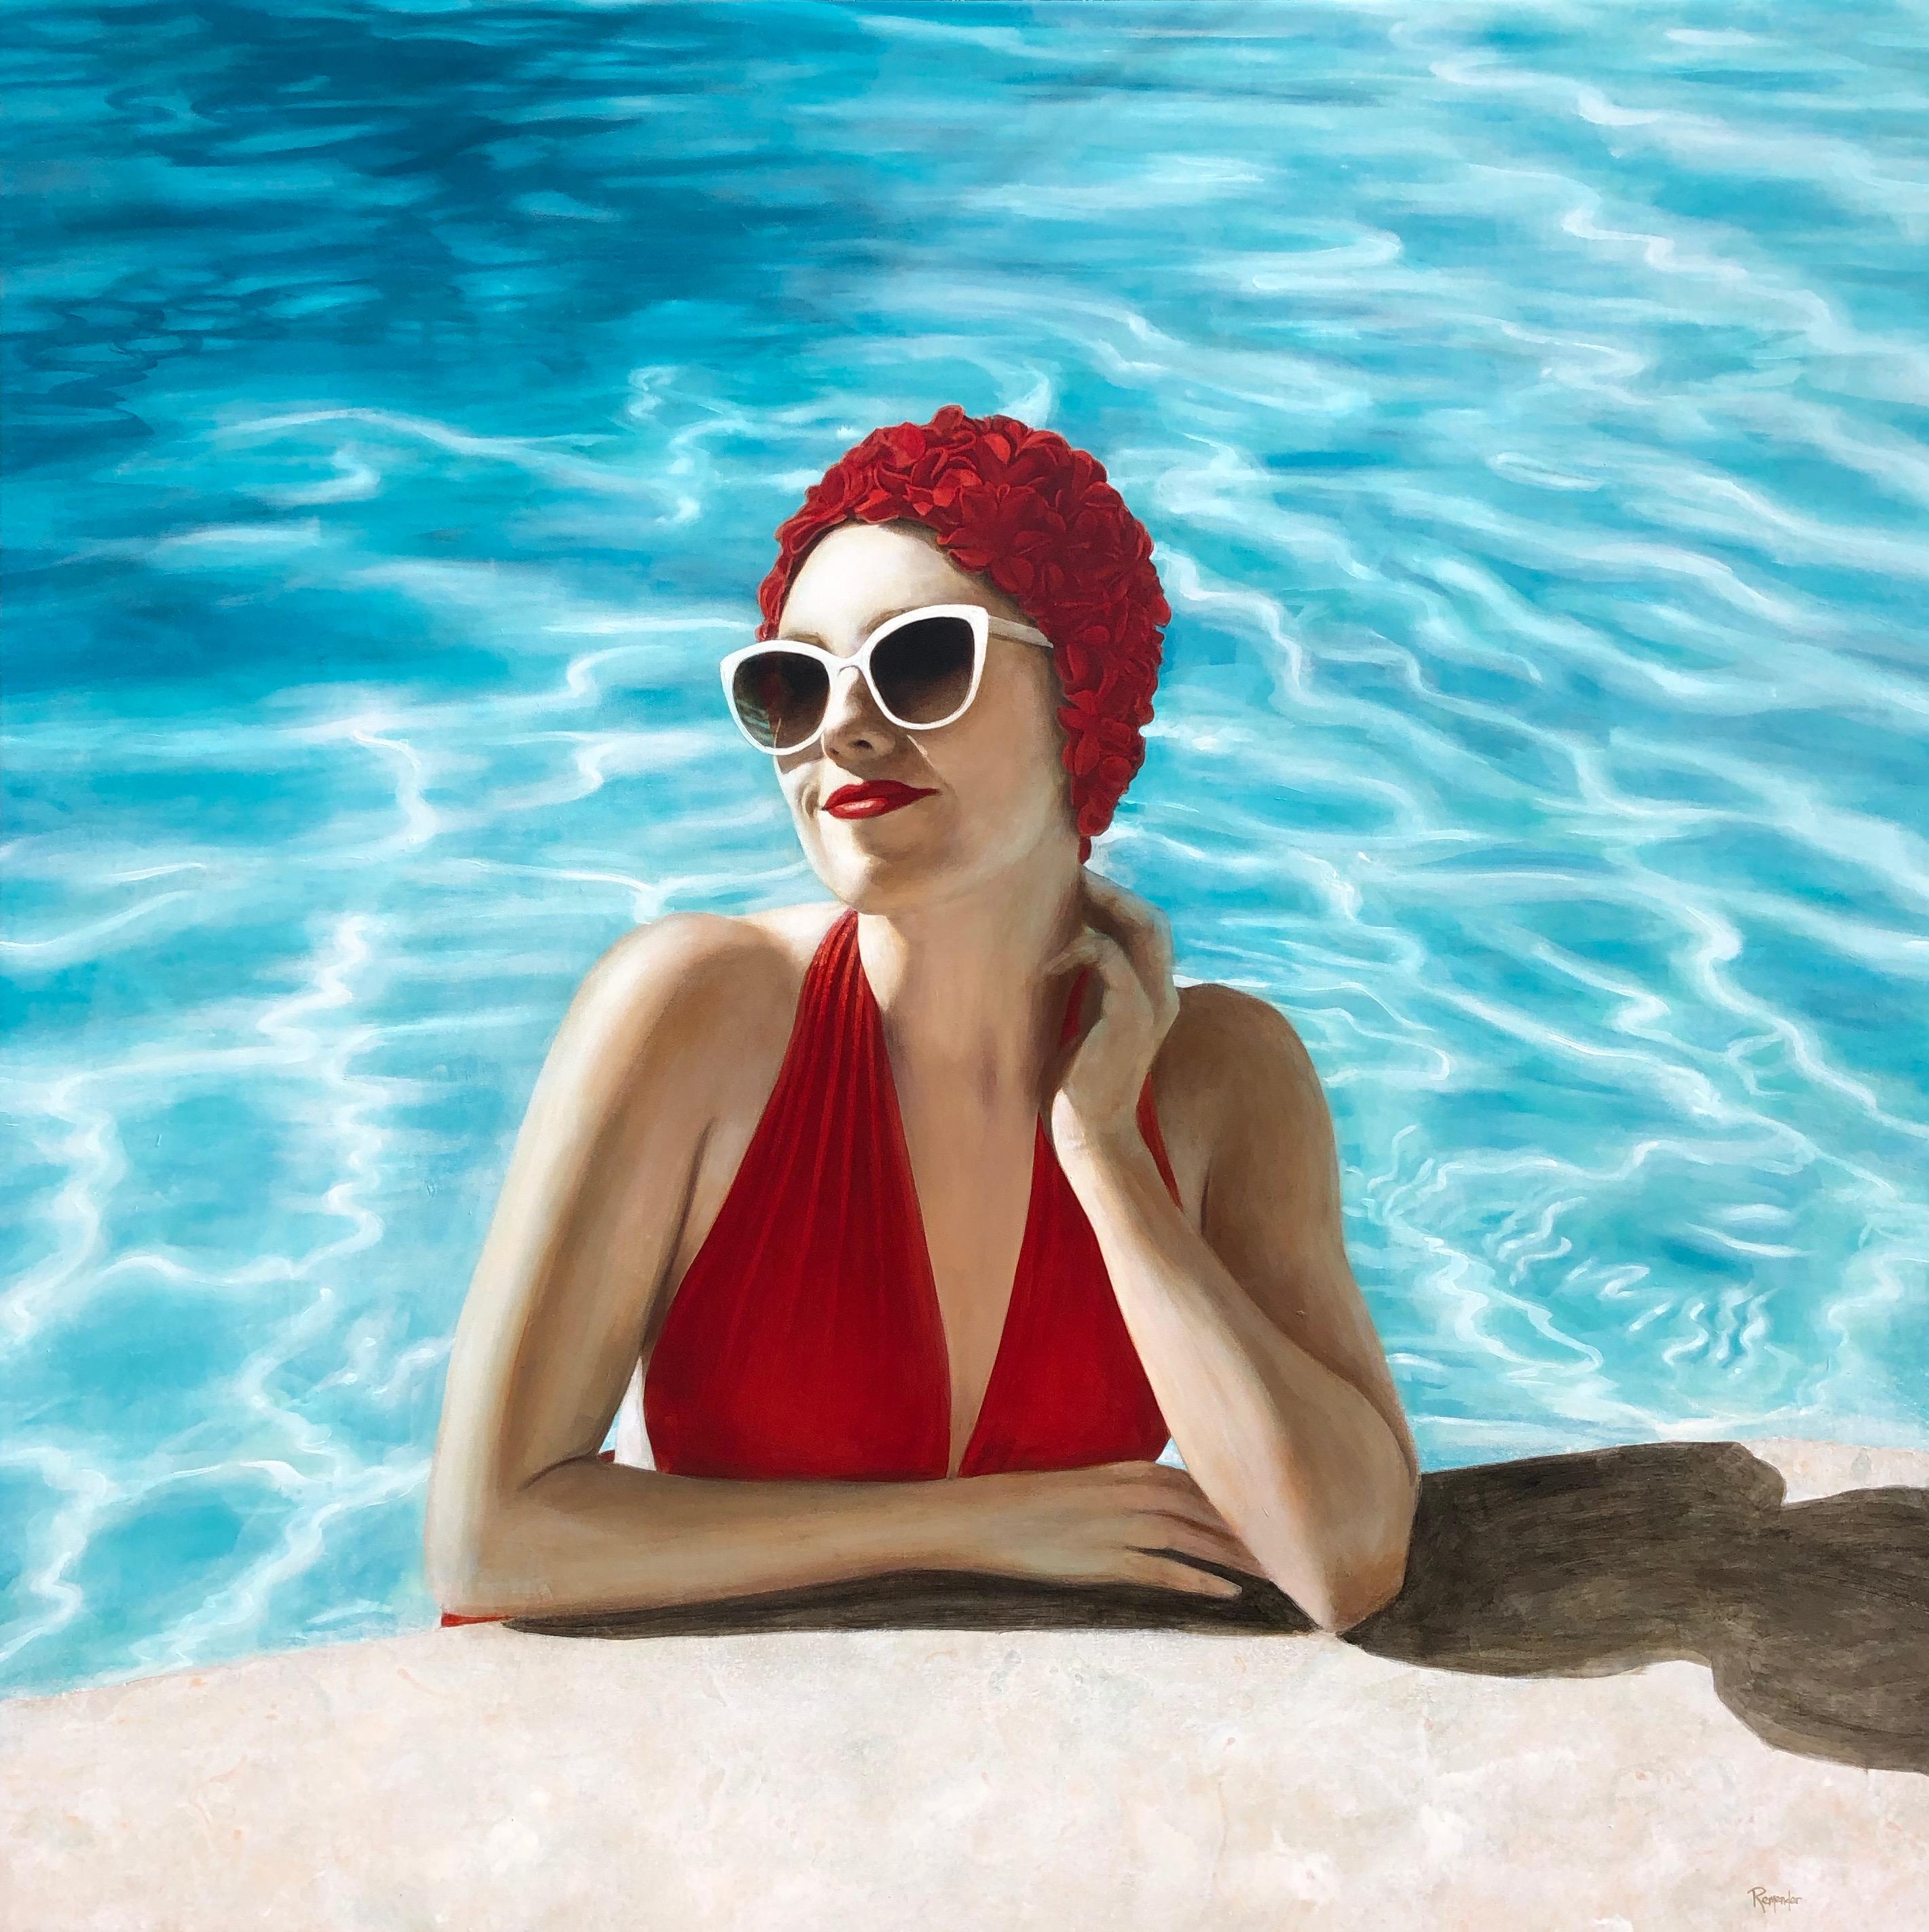 Elise Remender Figurative Painting - "Poolside" portrait of a woman in a red suit and cap in a blue pool 